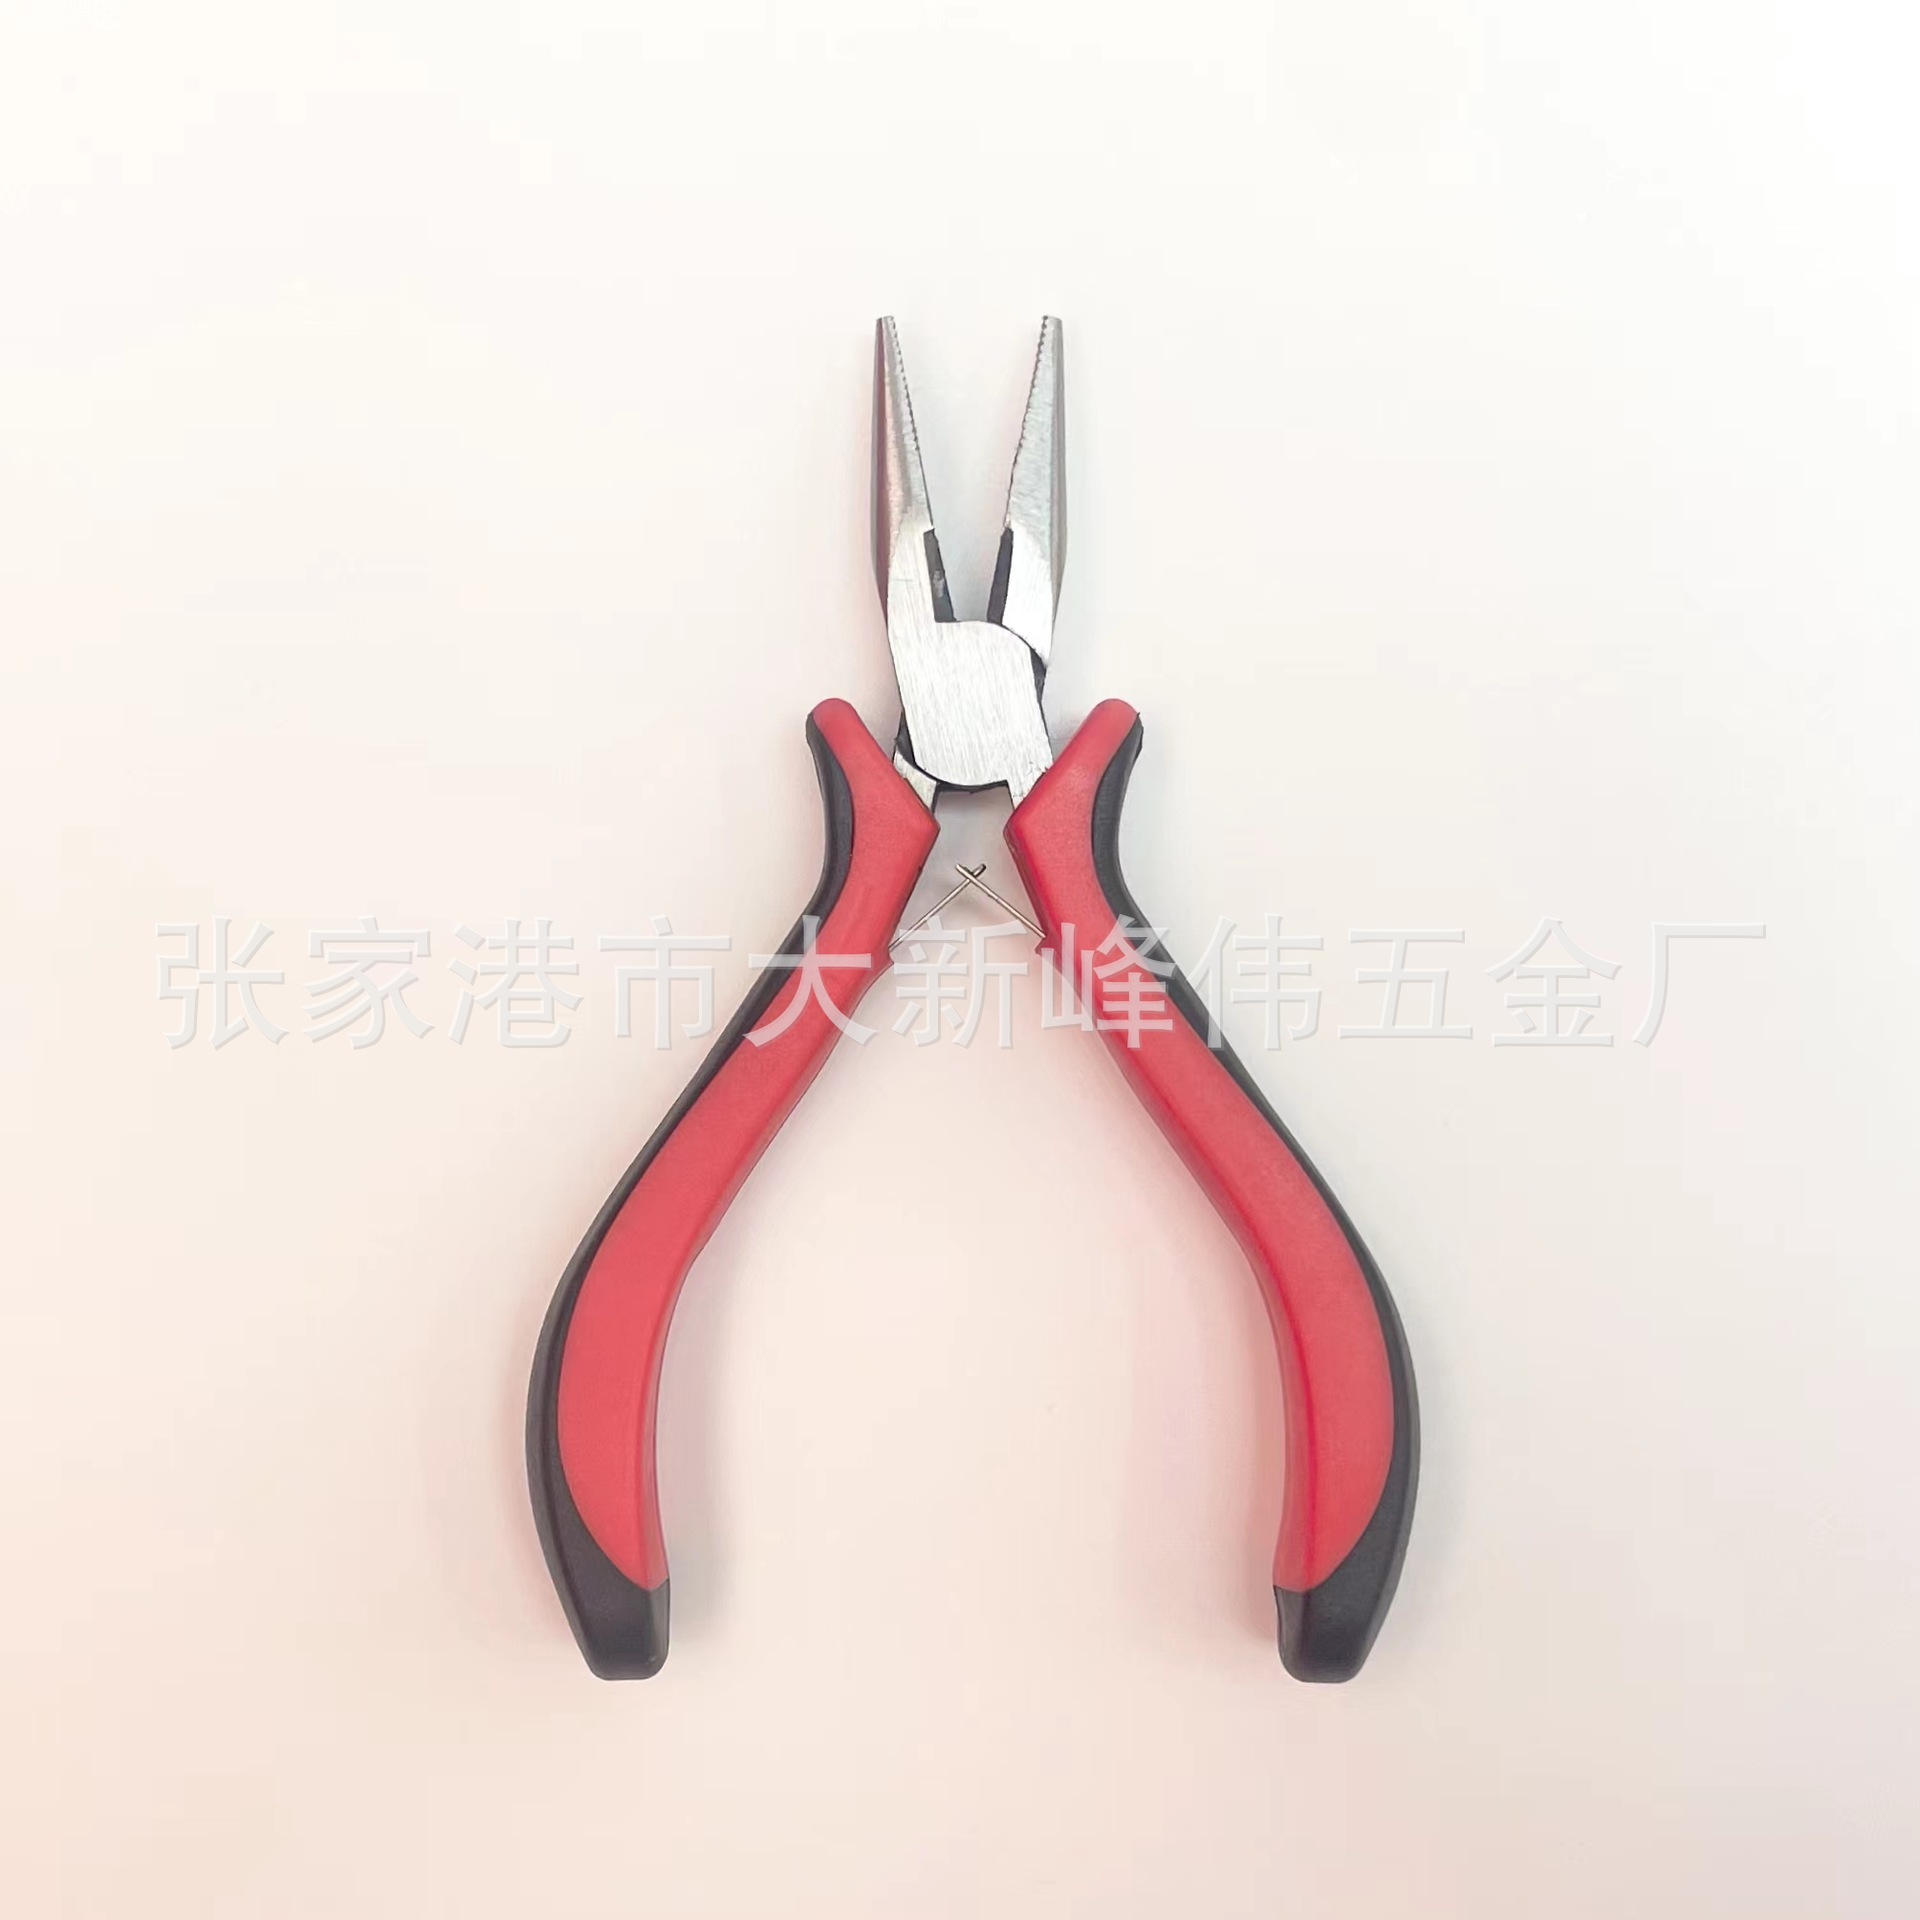 Factory 4.5-Inch Mini Pliers with Handle Pointed Nose Pliers Hair Extension Pliers round Drip Tip Black and Red Handle Slanting Forceps Jewelry